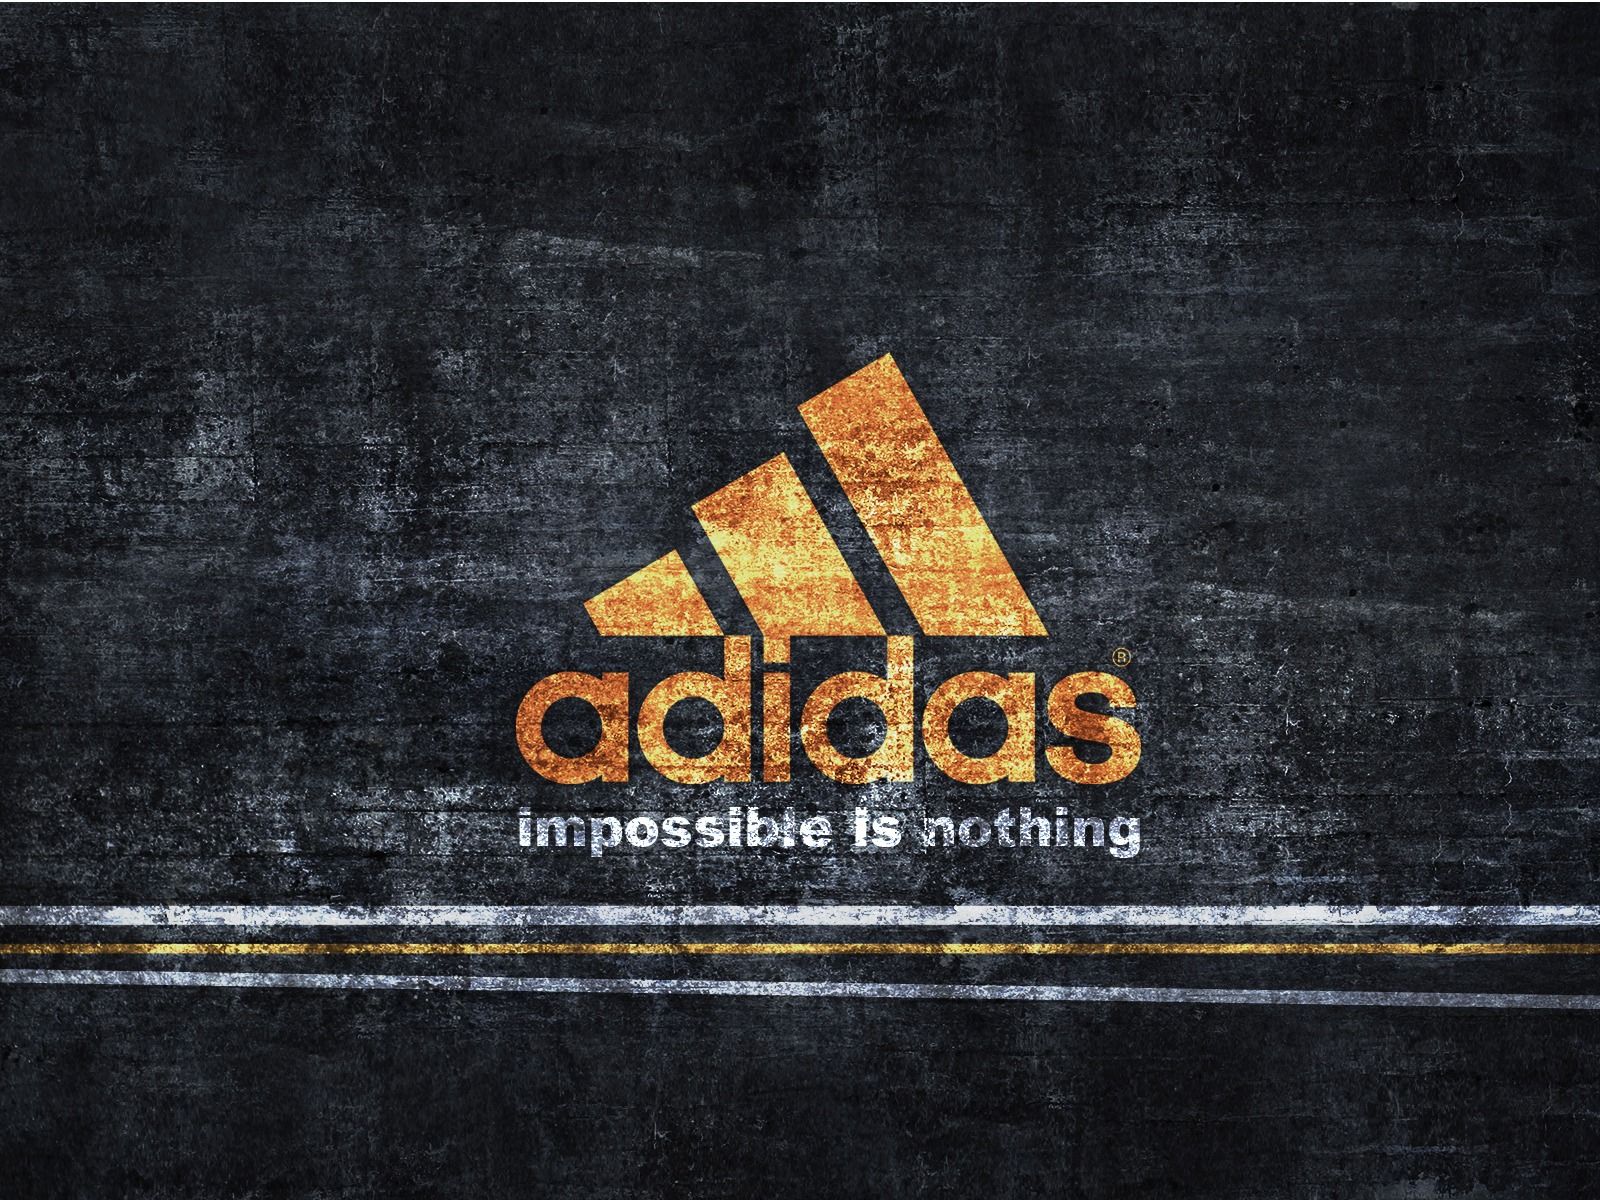 Adidas Wallpaper Brands Other Wallpaper in jpg format for free